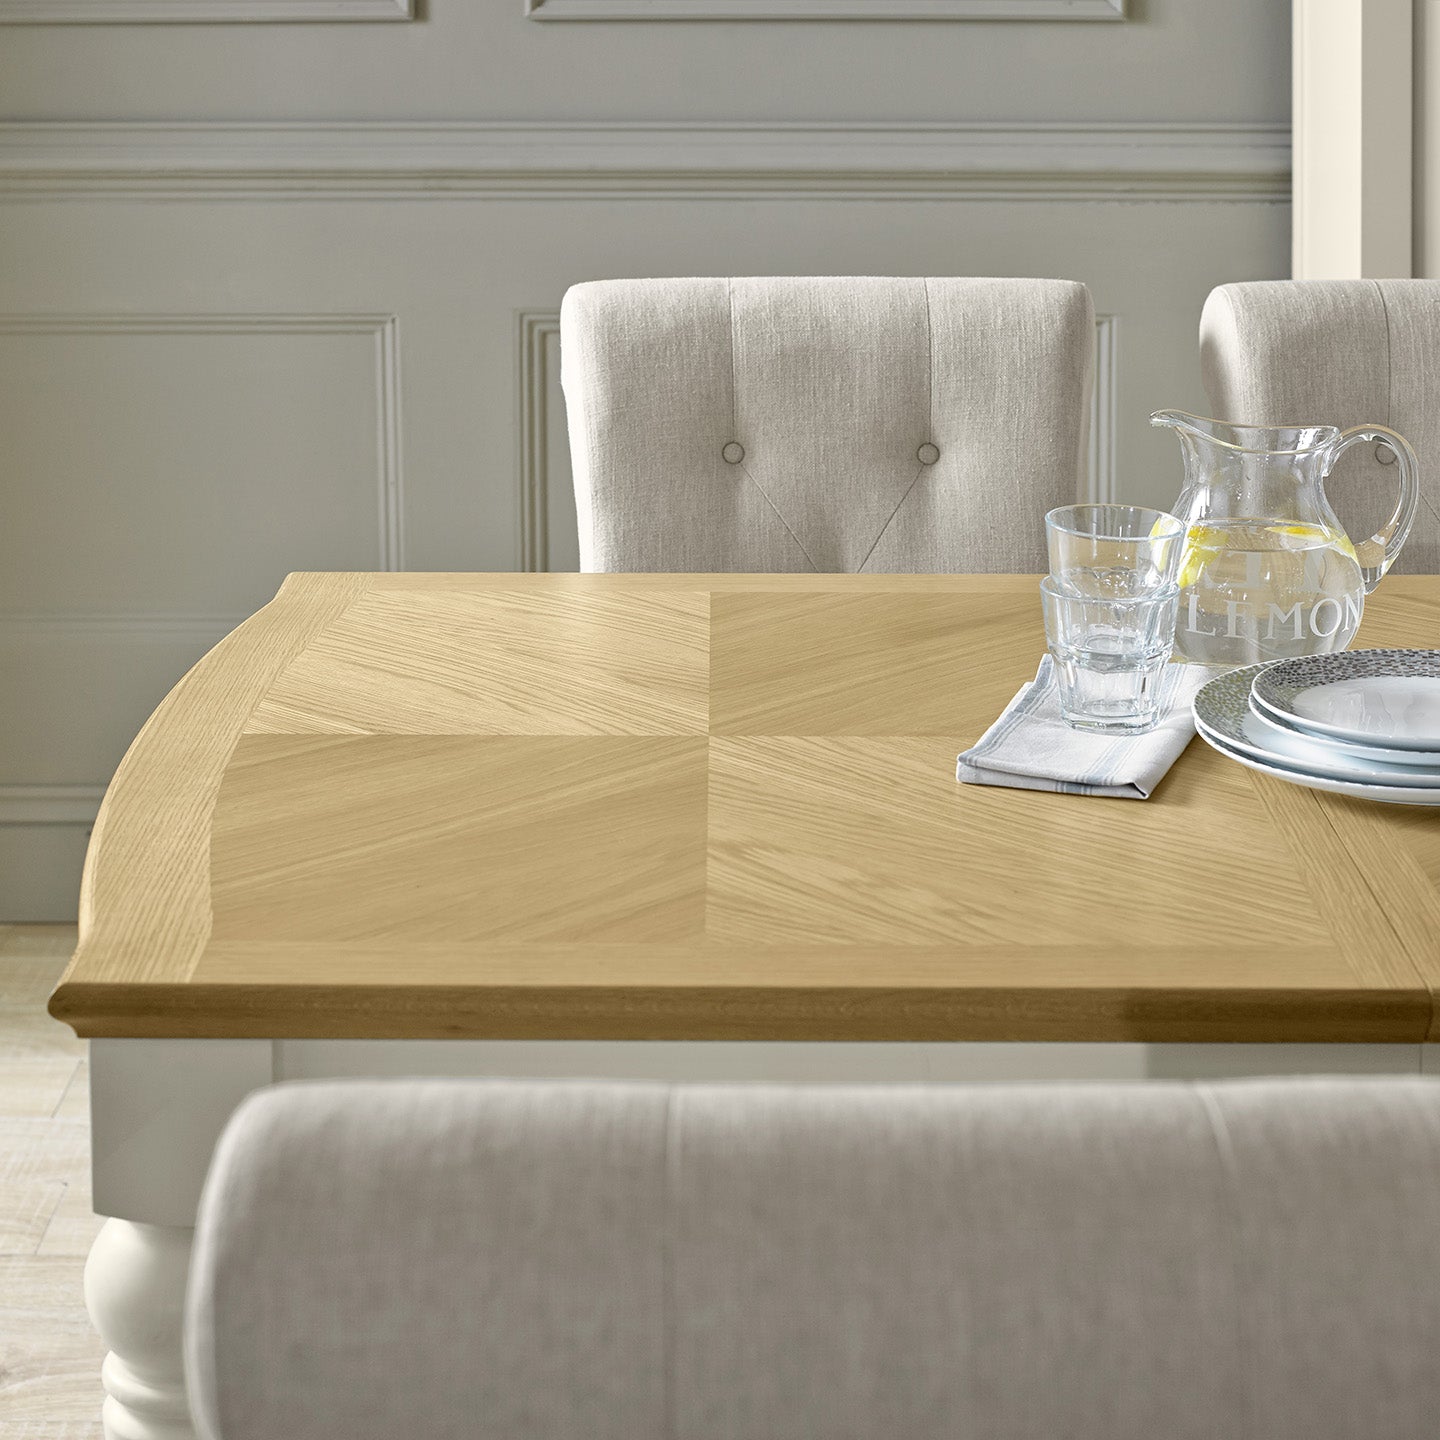 Montreux Medium Extending Dining Table - Oak & Antique White from UpstairsDownstairs.ie